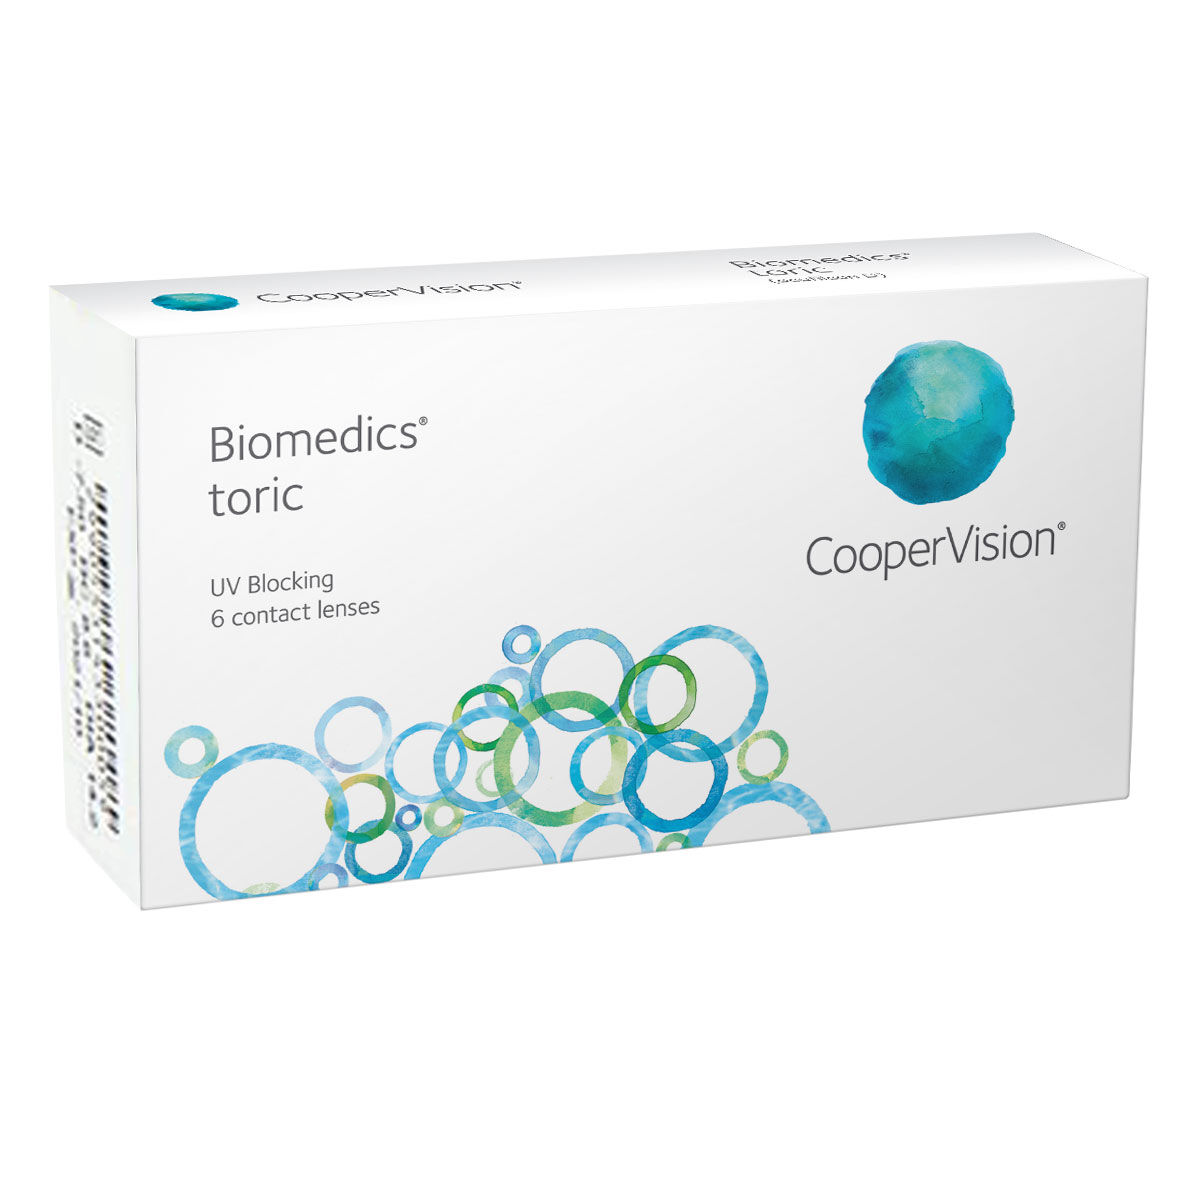 CooperVision Biomedics Toric (6 Contact Lenses), CooperVision, Toric Monthly Disposables, Ocufilcon D